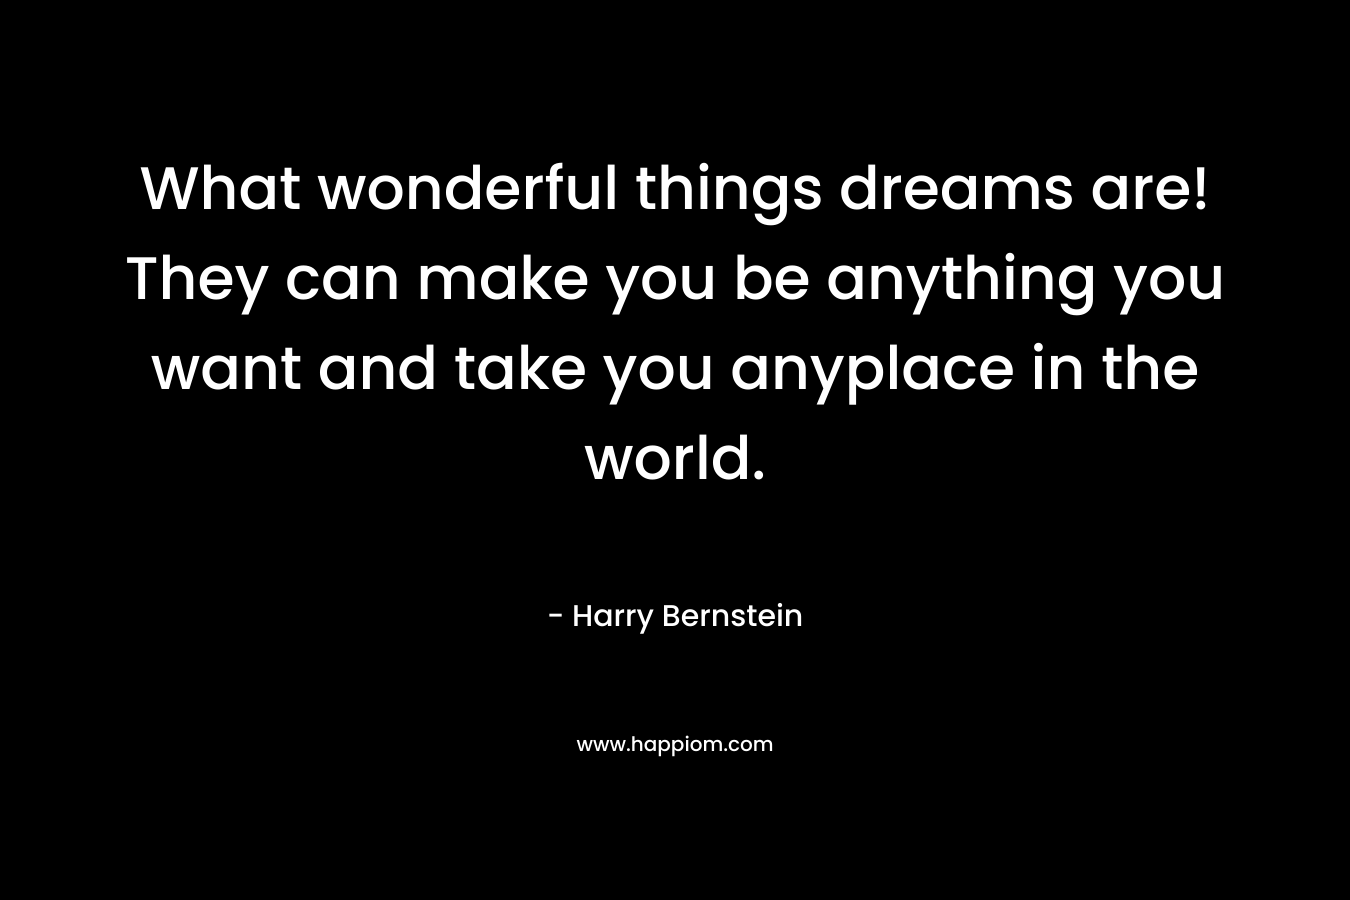 What wonderful things dreams are! They can make you be anything you want and take you anyplace in the world. – Harry Bernstein